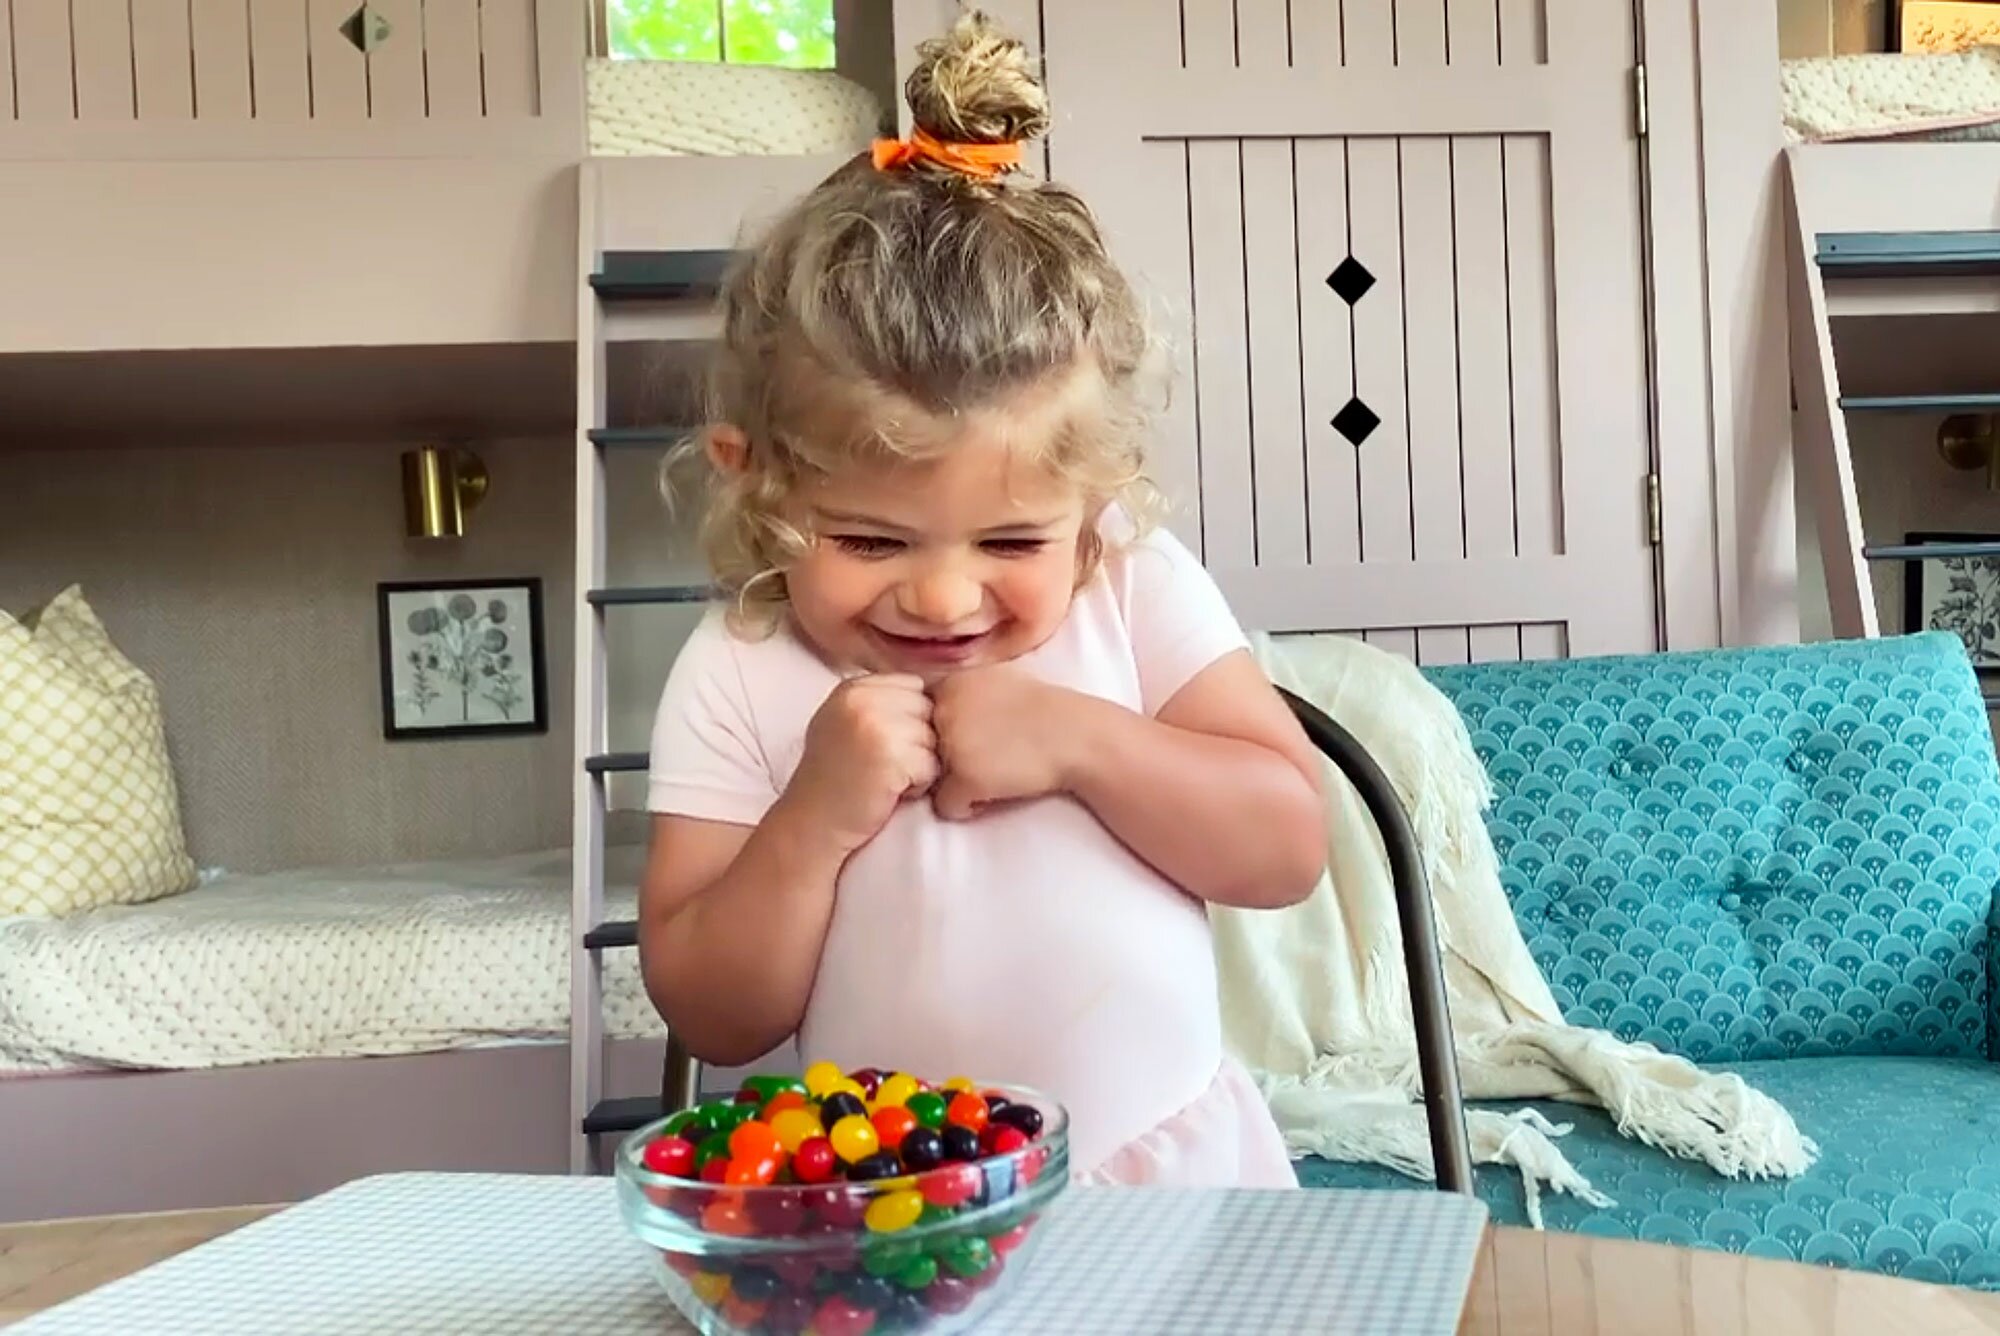 Thomas Rhett and Lauren Akins' Daughter Ada James Had an Adorable Response to the Candy Challenge